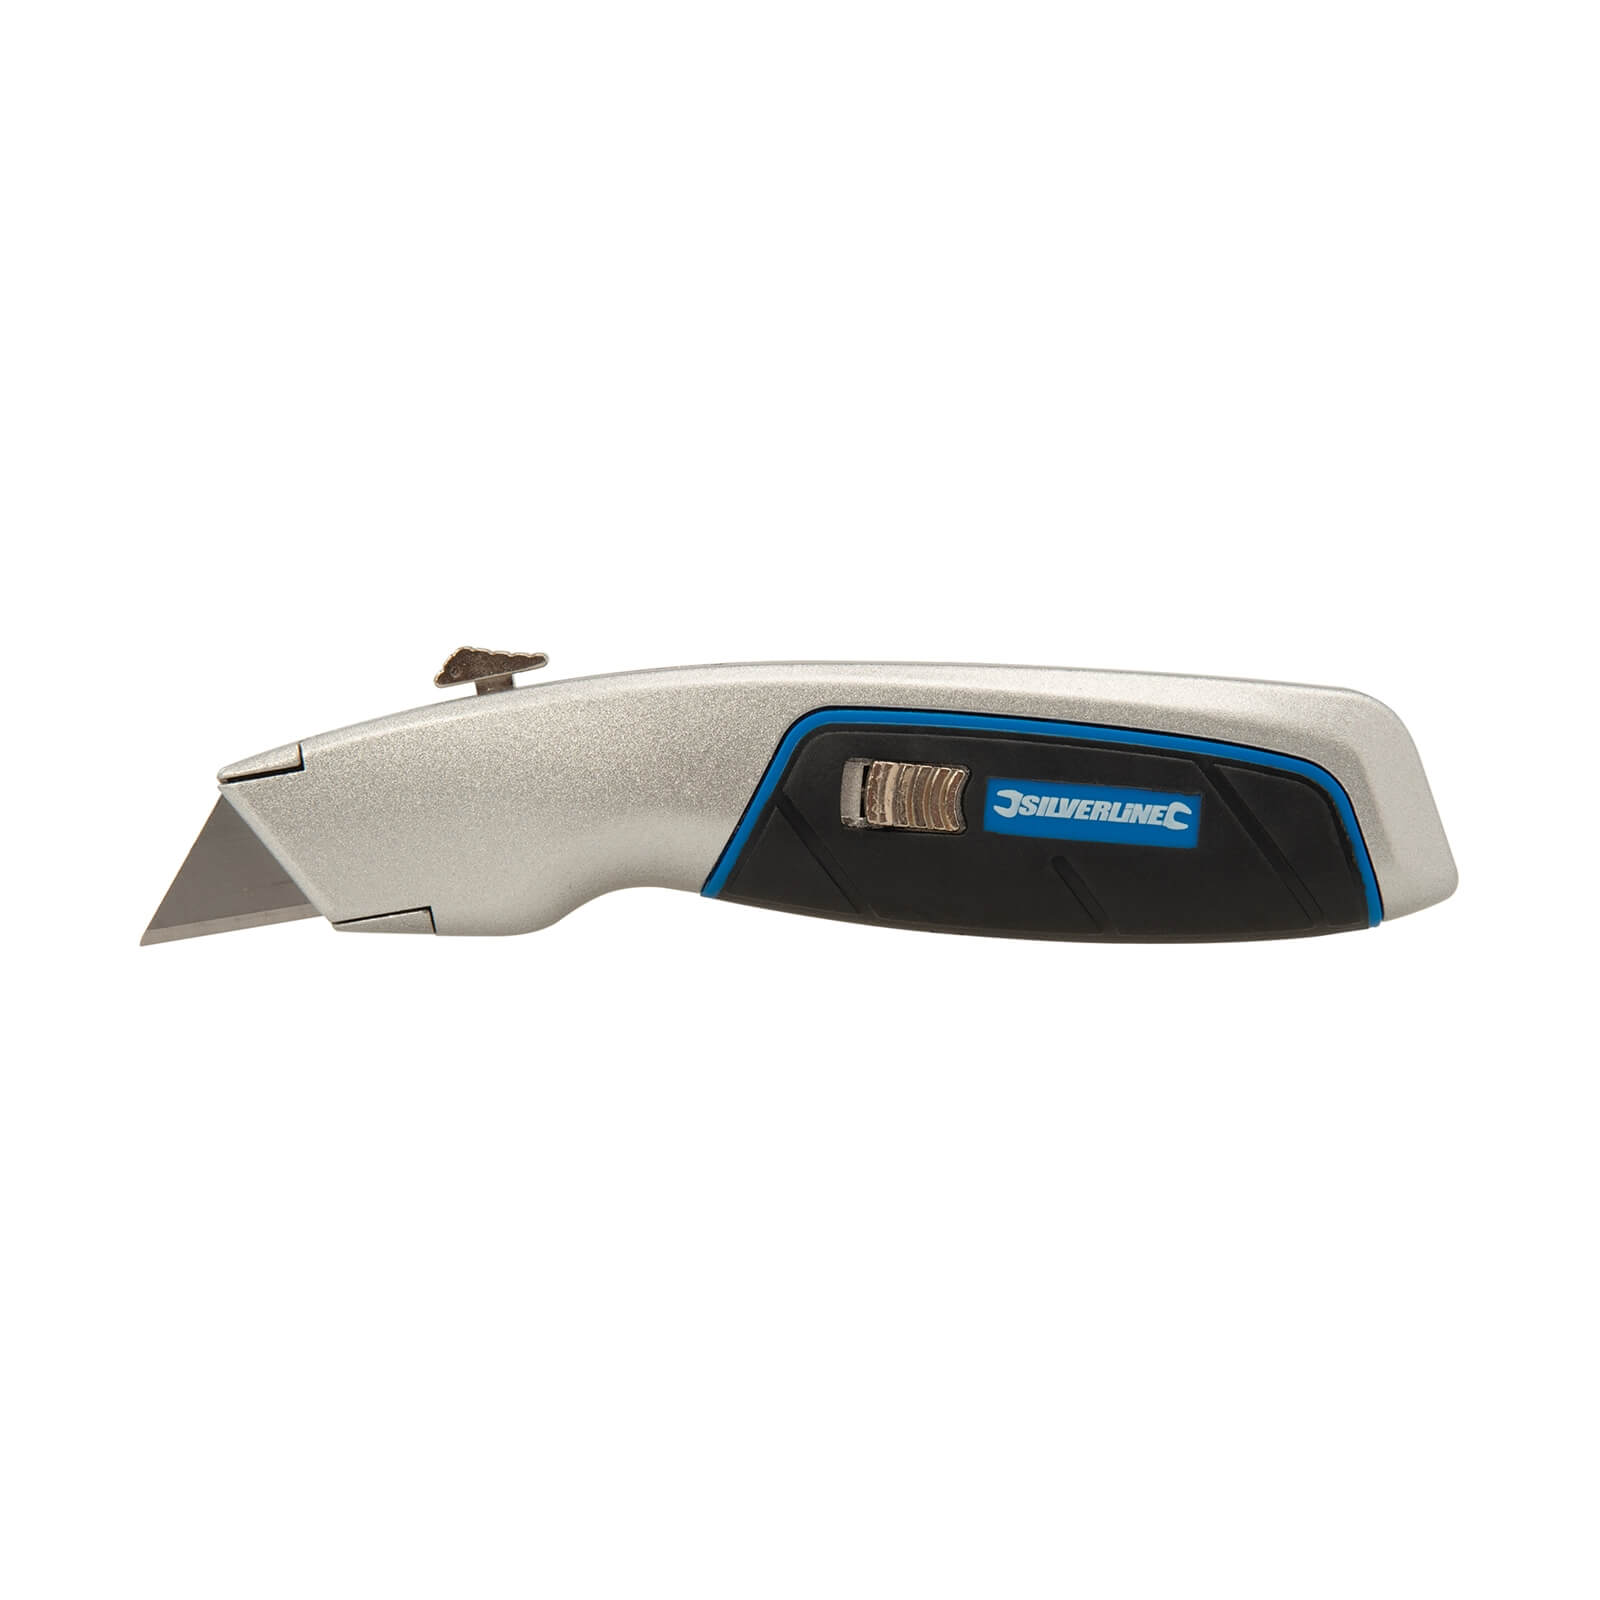 Silverline Quick-Change Retractable Knife 175mm